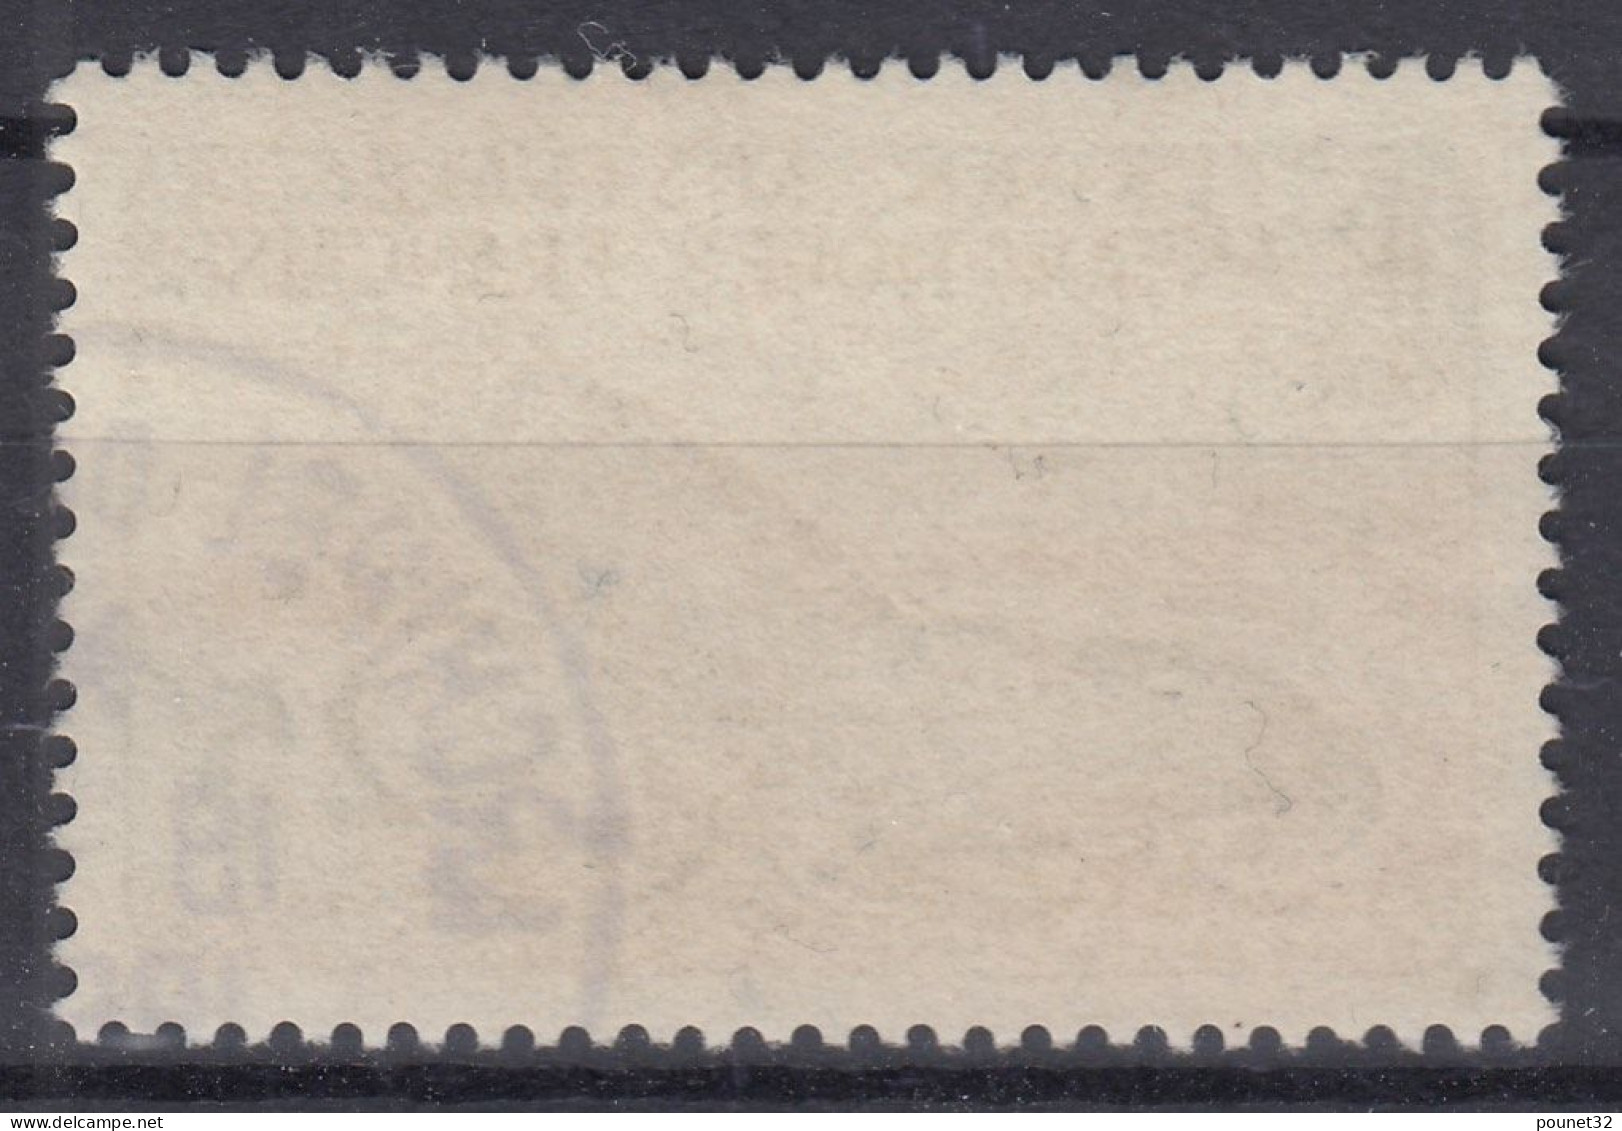 TIMBRE TAAF OTARIE N° 16 OBLITERATION CACHET A DATE ARCHIPEL DES KERGUELEN - Used Stamps